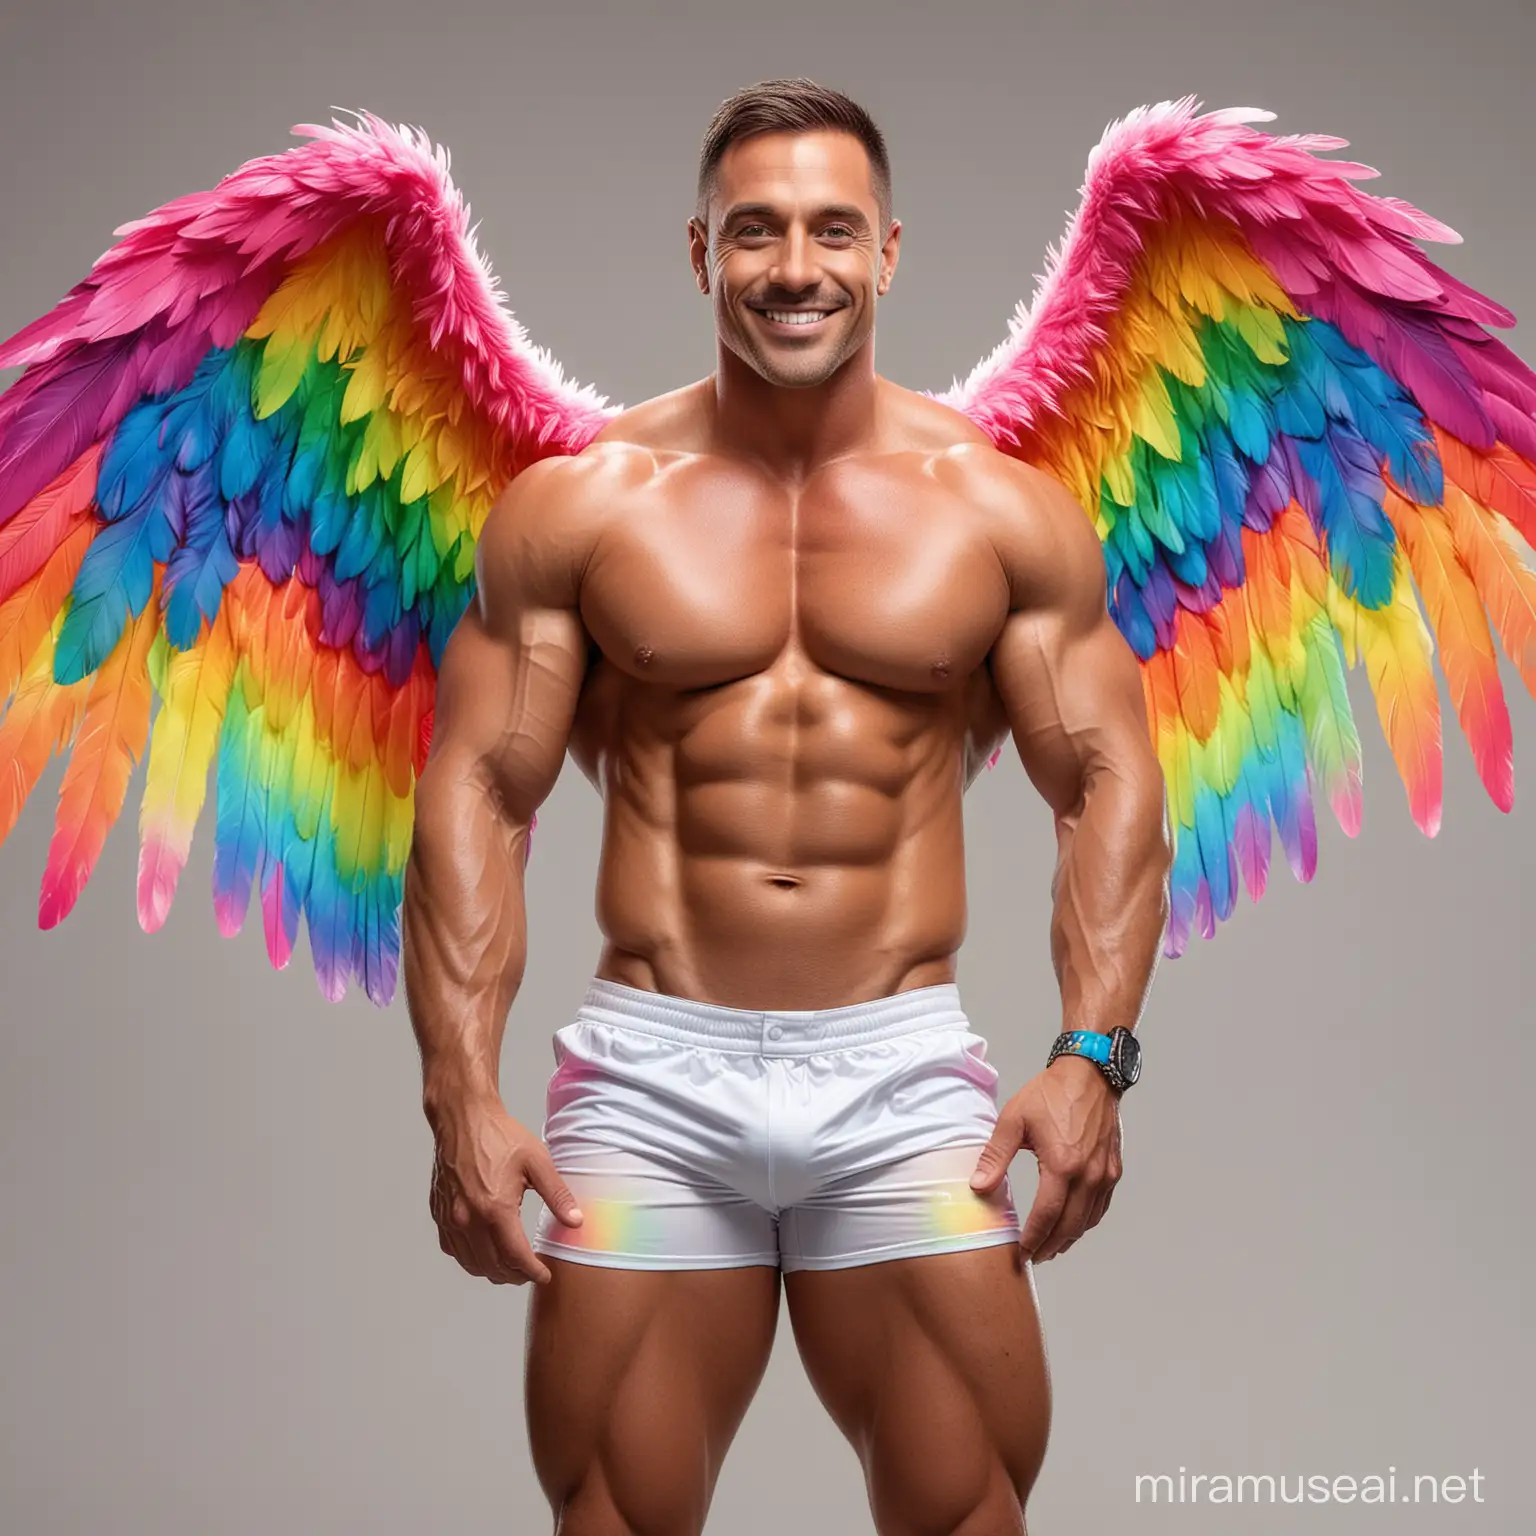 Full Body to feet Topless 30s Ultra Chunky Big Eyes IFBB Bodybuilder Daddy with Great Smile wearing Multi-Highlighter Bright Rainbow with white Coloured See Through Eagle Wings Shoulder LED Jacket Short shorts left arm up Flexing